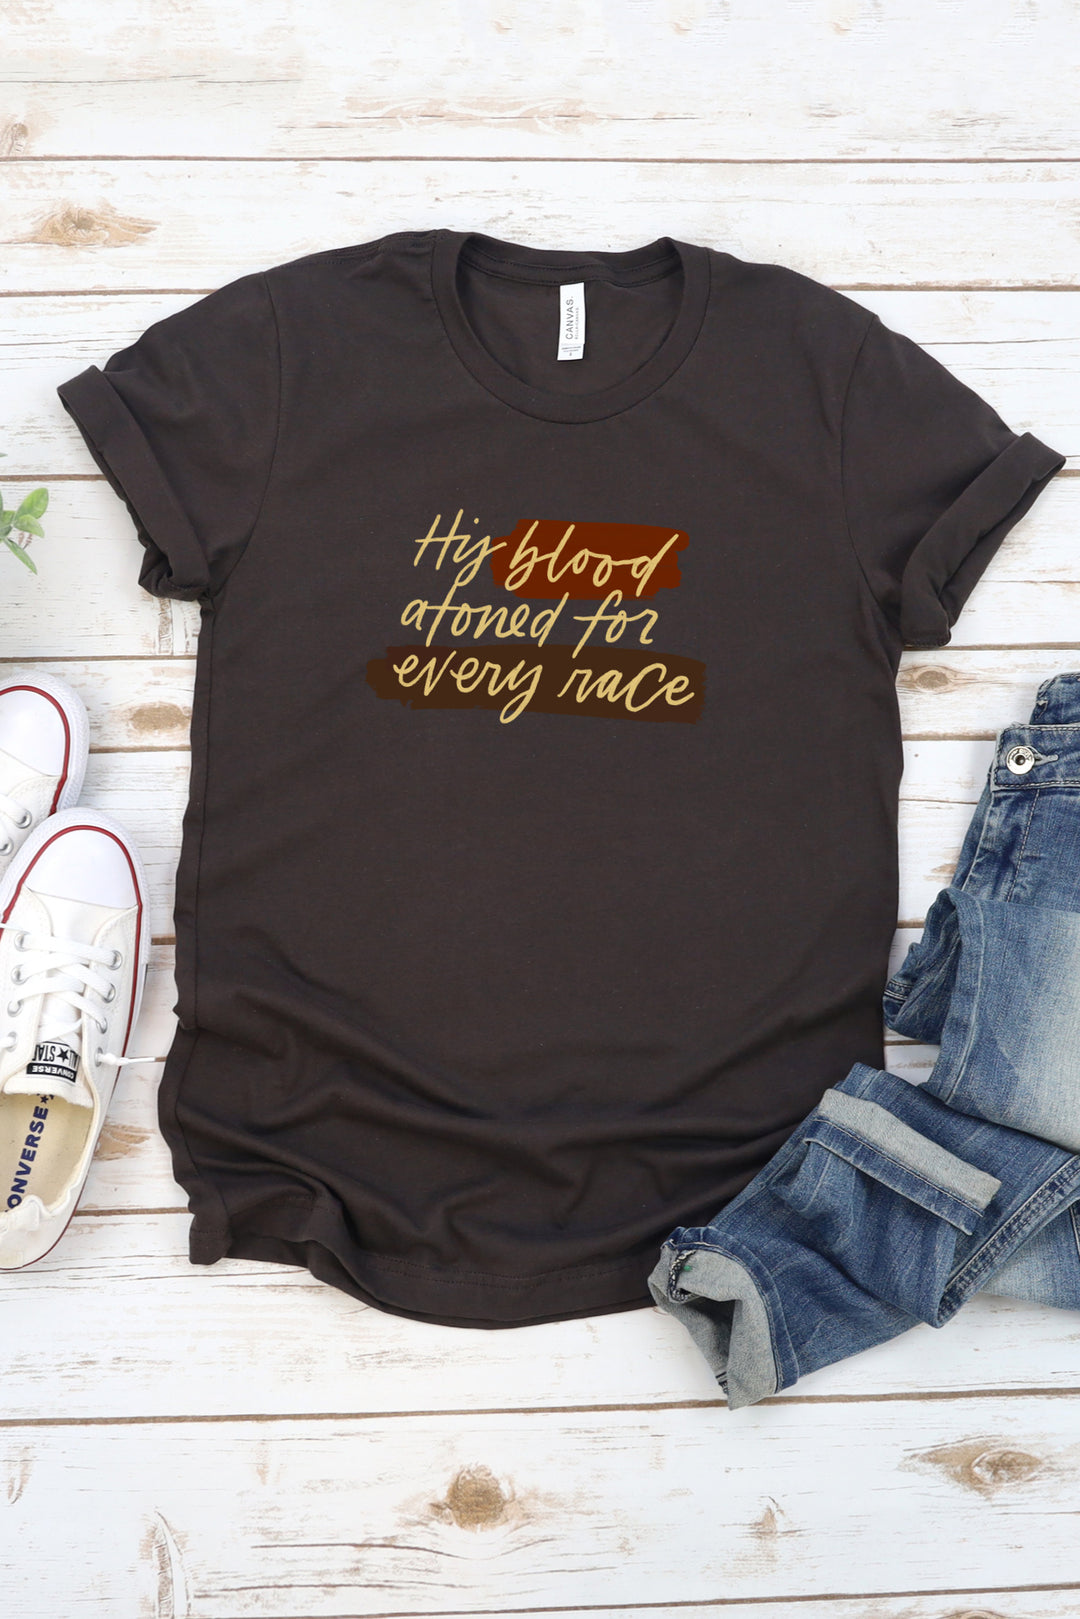 "His Blood Atoned for Every Race" Tee